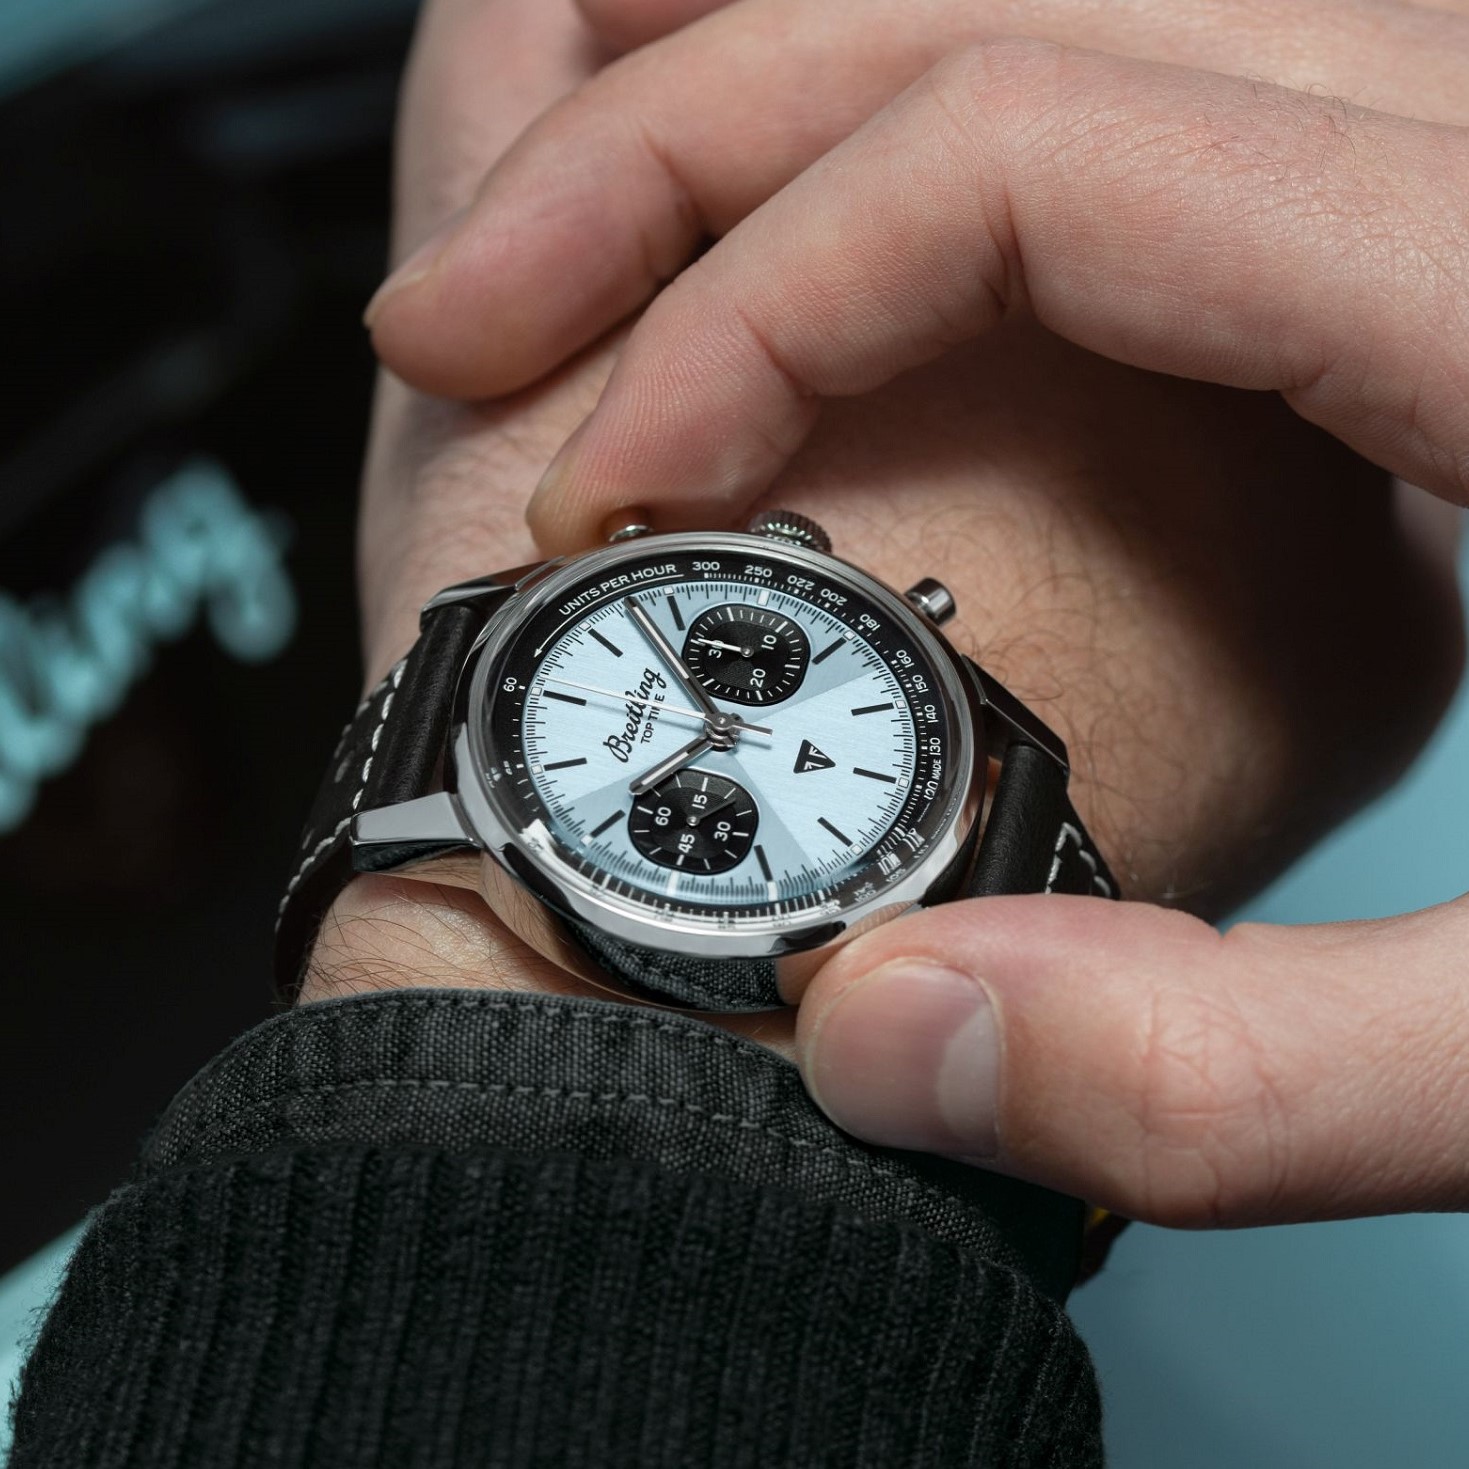 Breitling - Top Time Triumph, Time and Watches